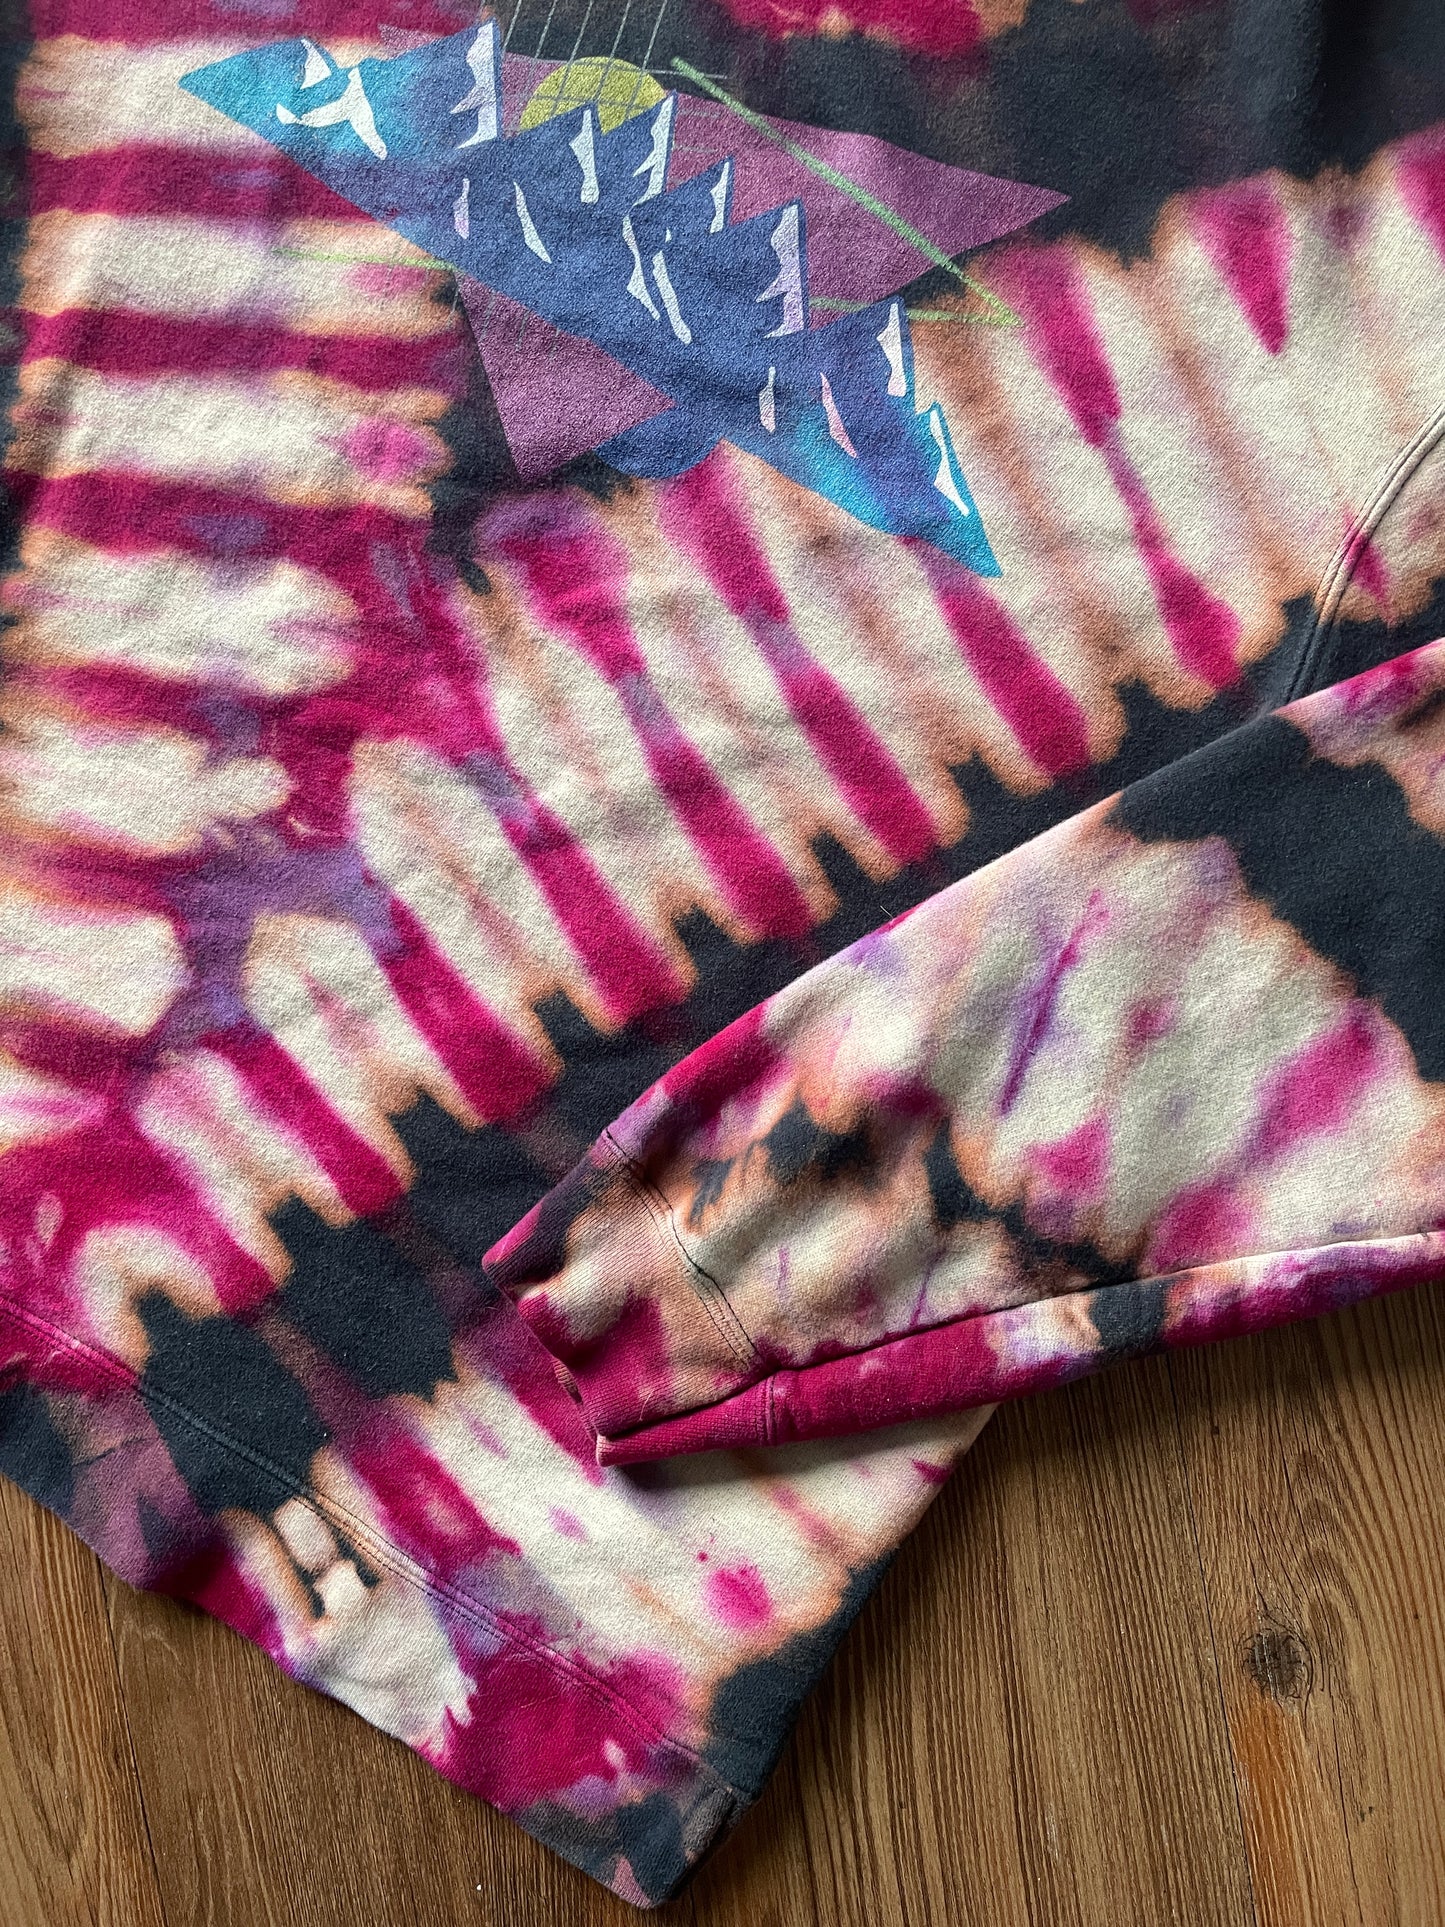 XL Men’s Retro Mountainscape Handmade Tie Dye Sweatshirt | One-Of-a-Kind Black and Pink Long Sleeve